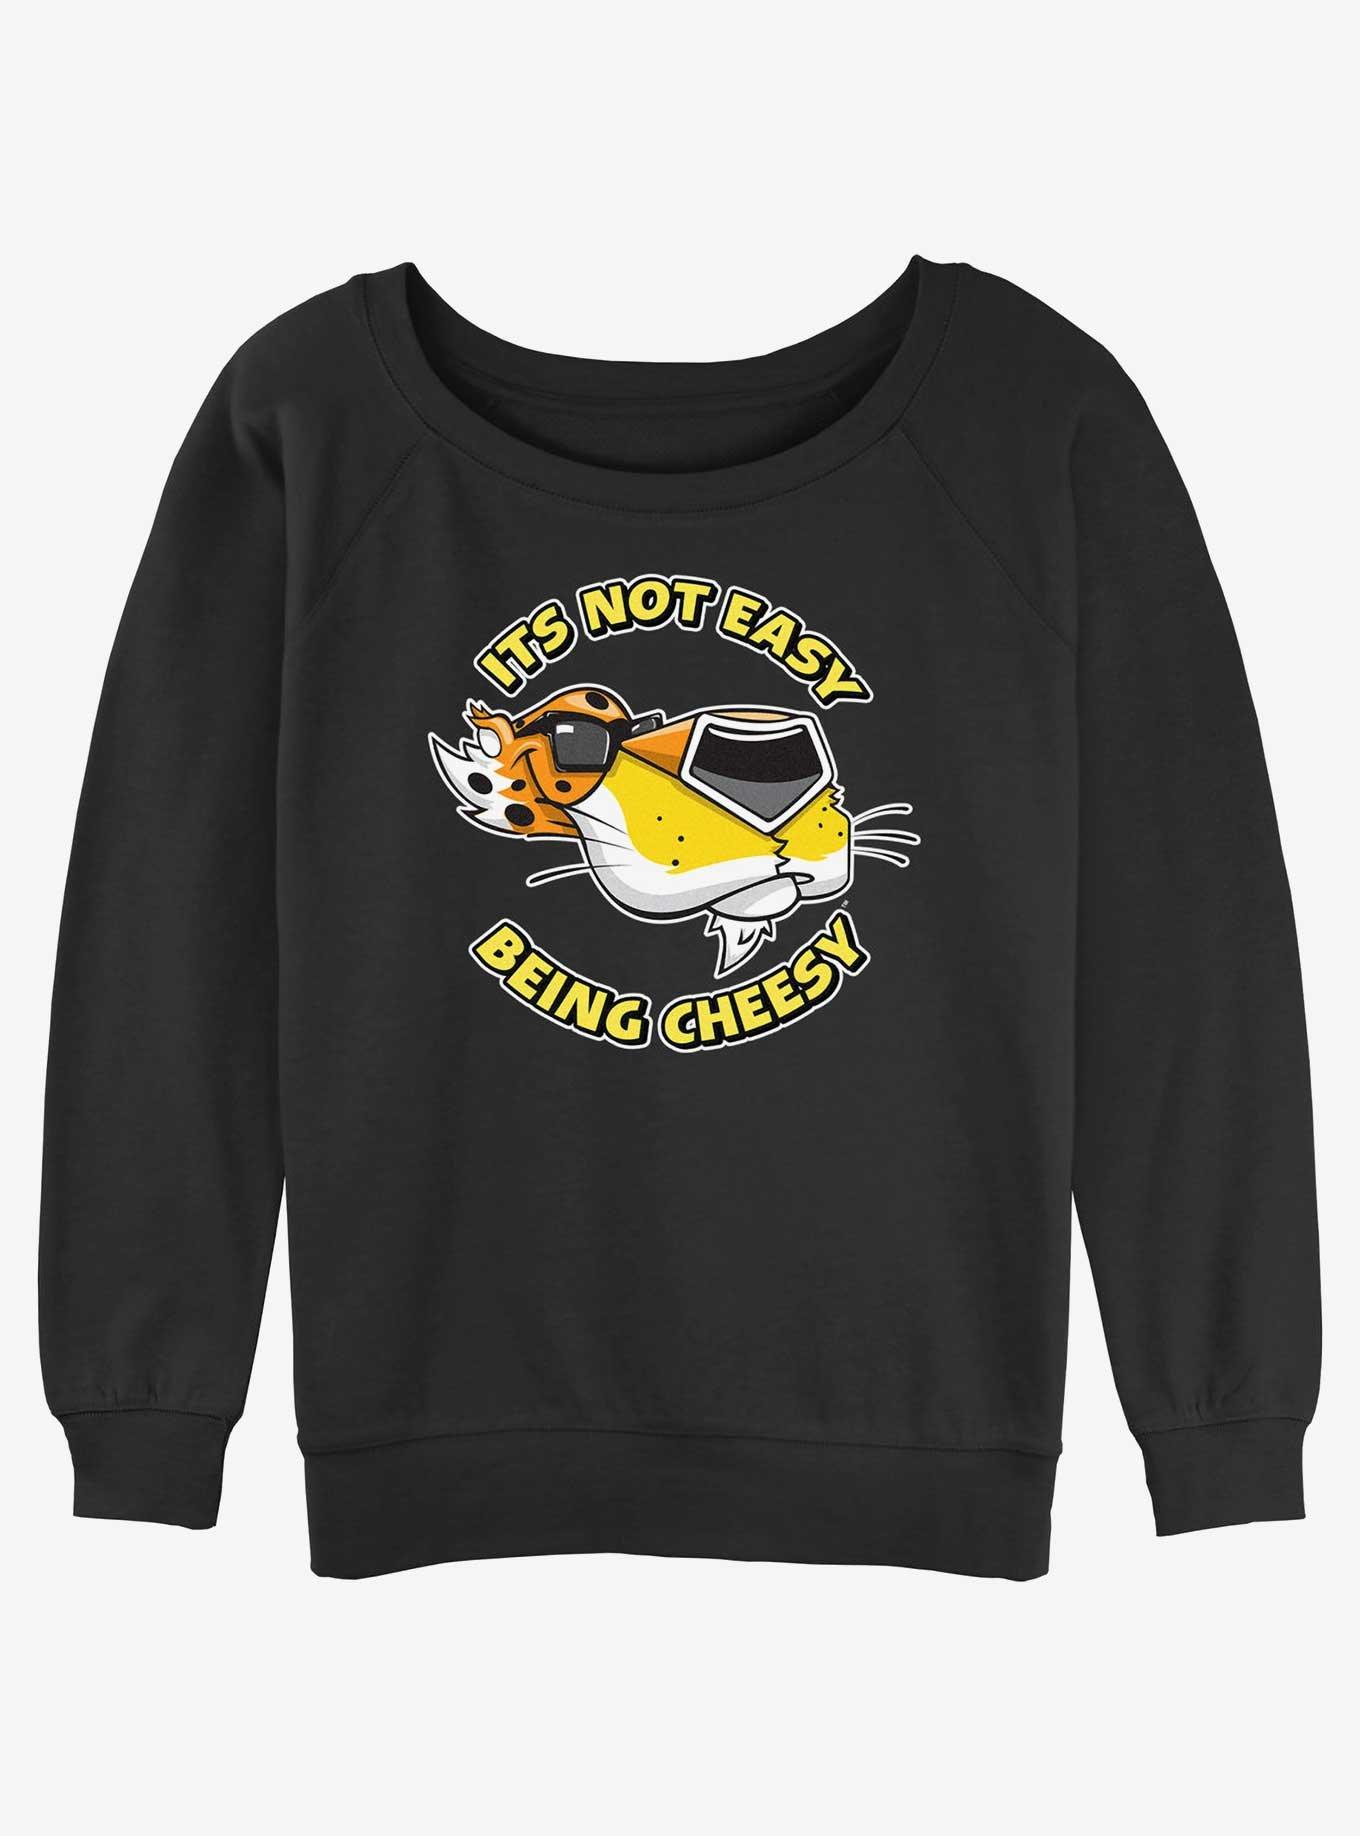 Cheetos Chester Not Easy Being Cheesy Girls Slouchy Sweatshirt, BLACK, hi-res